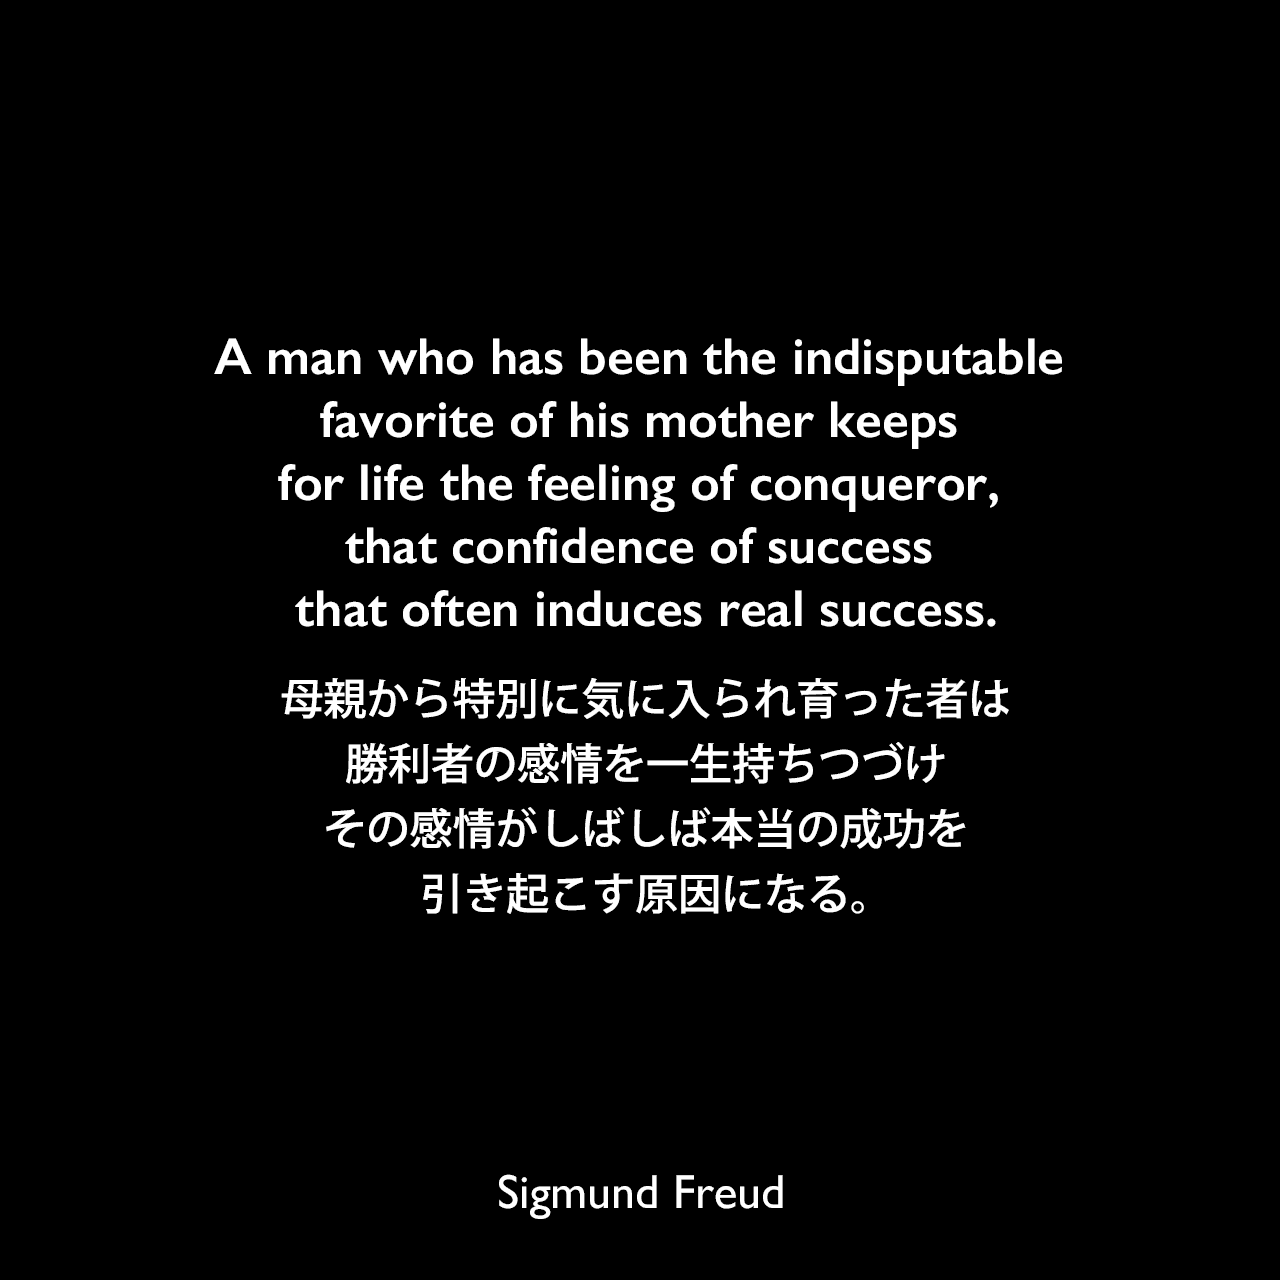 A man who has been the indisputable favorite of his mother keeps for life the feeling of conqueror, that confidence of success that often induces real success.母親から特別に気に入られ育った者は、勝利者の感情を一生持ちつづけ、その感情がしばしば本当の成功を引き起こす原因になる。- アーネスト・ジョーンズによる本「The Life and Work of Sigmund Freud」よりSigmund Freud